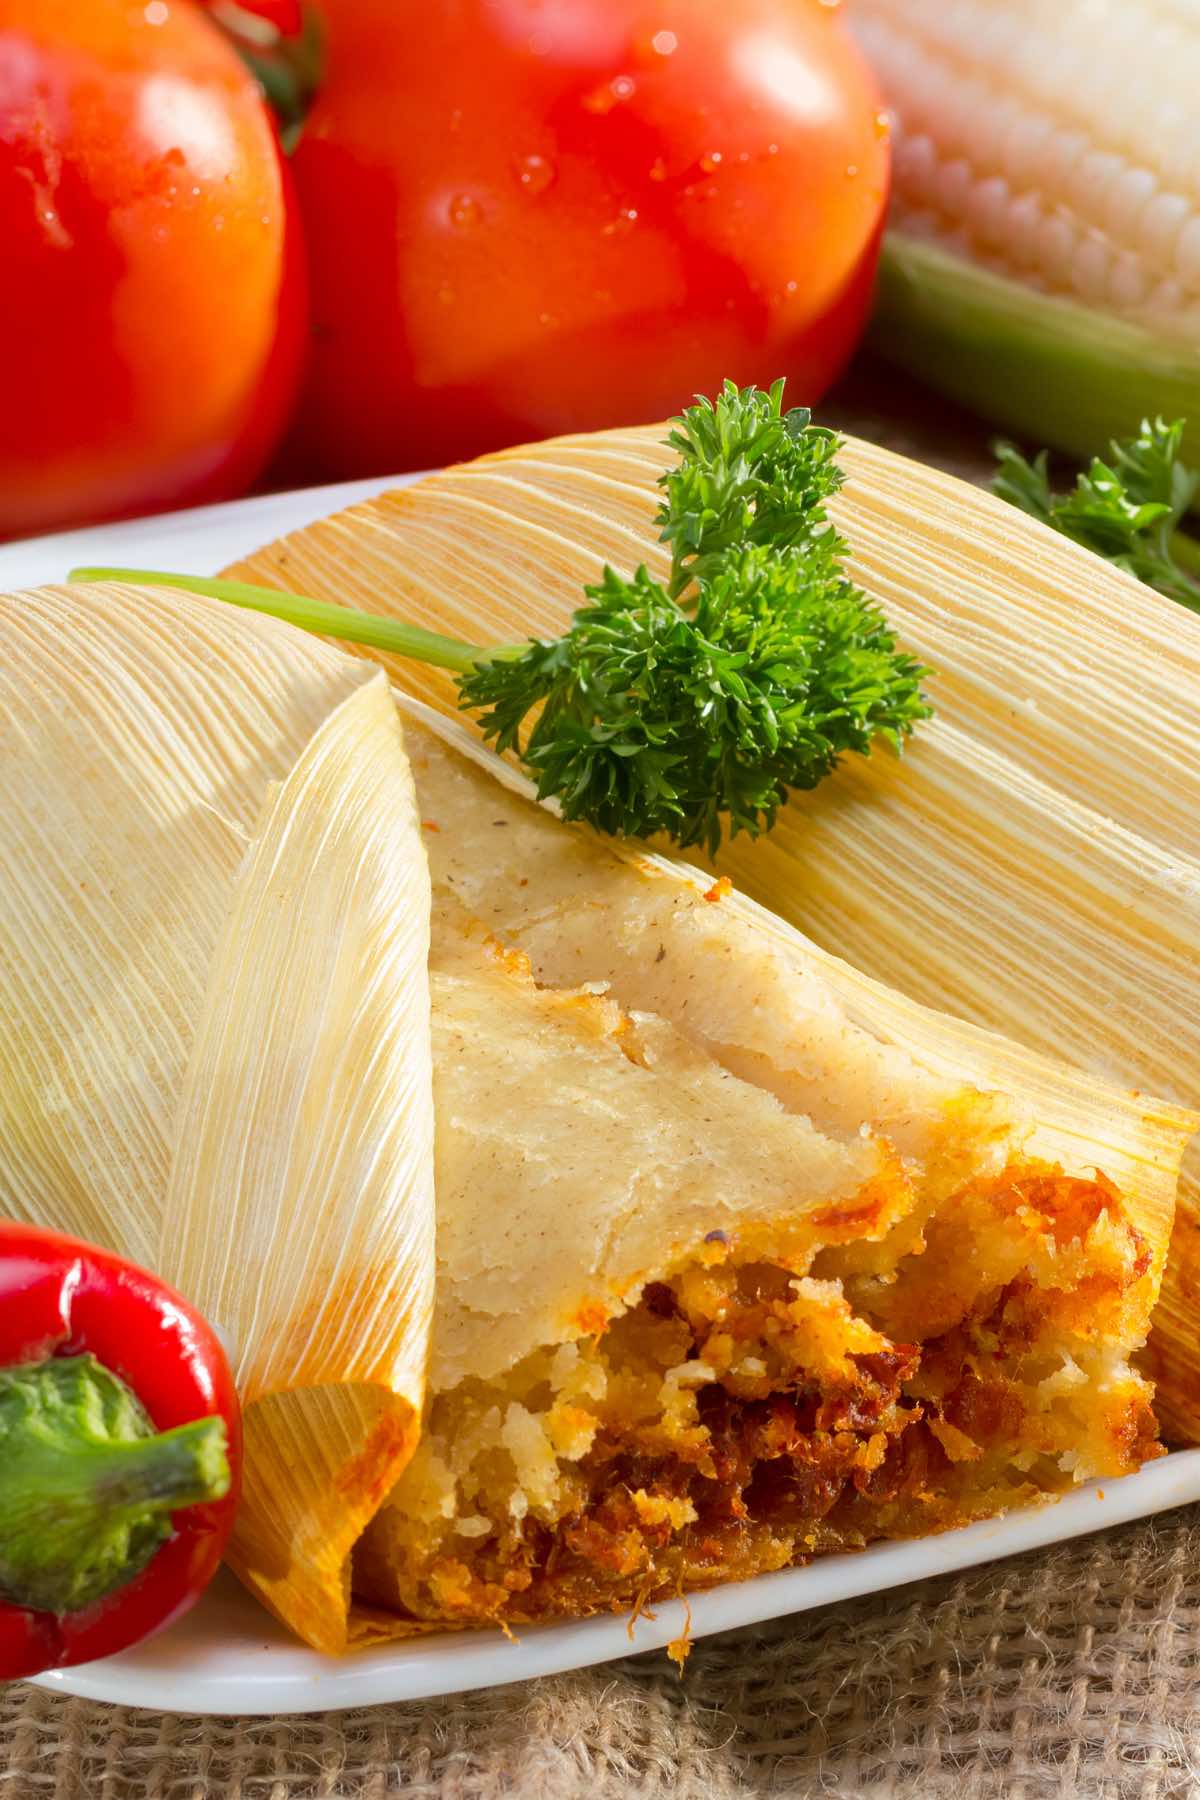 Tamales are a traditional dish in several Central and South American countries, but Tamales Mexicanos (Mexican tamales) is perhaps the most famous version.